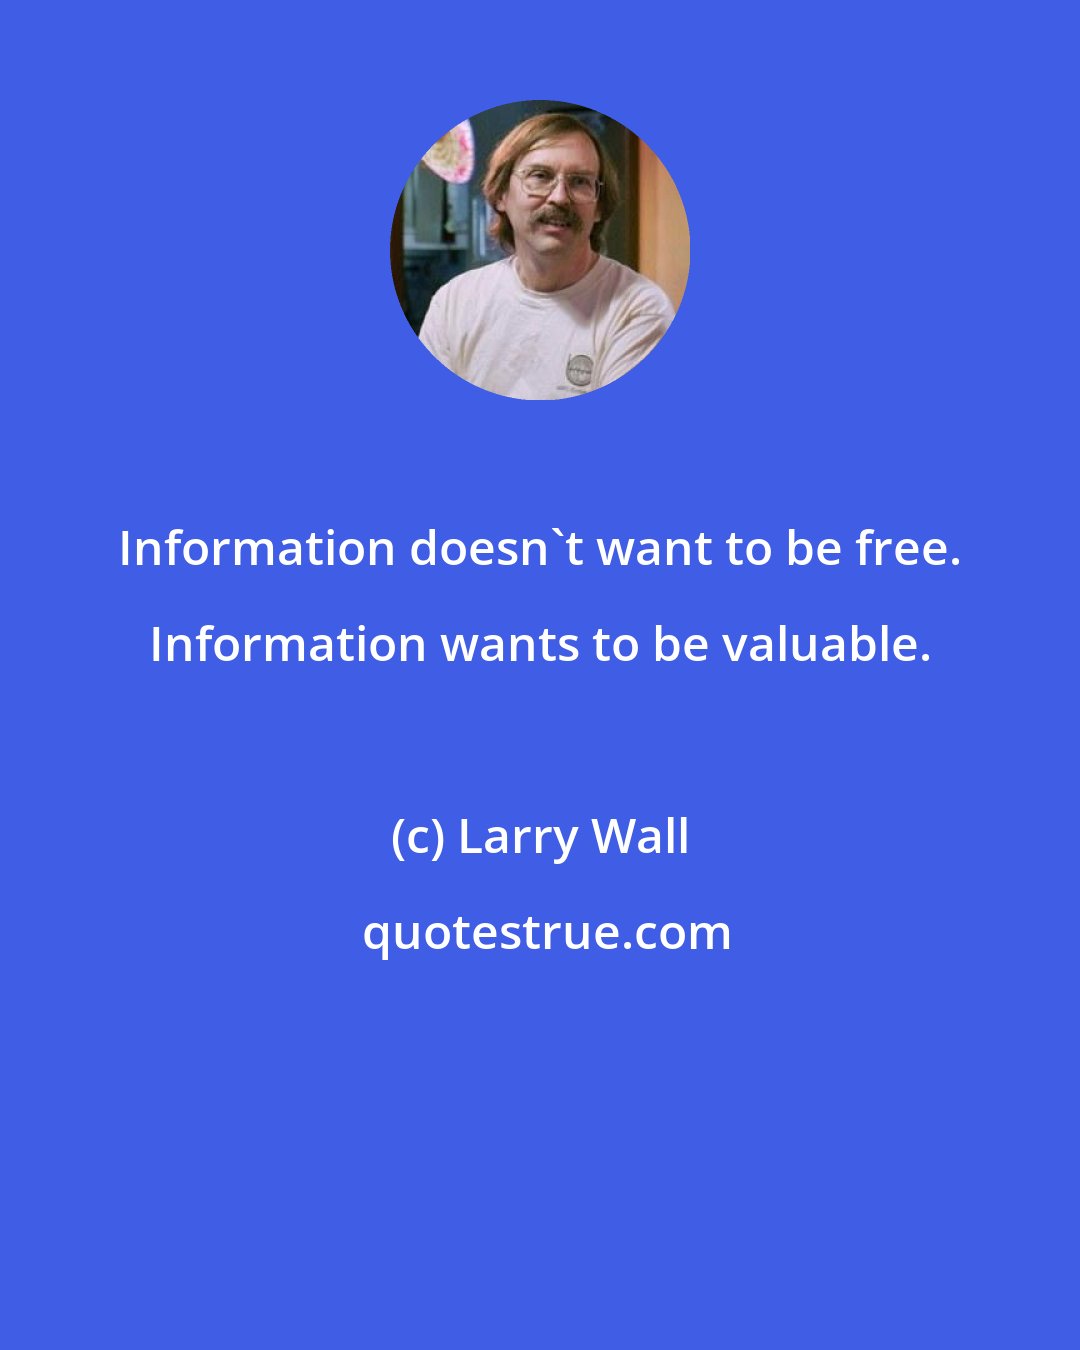 Larry Wall: Information doesn't want to be free. Information wants to be valuable.